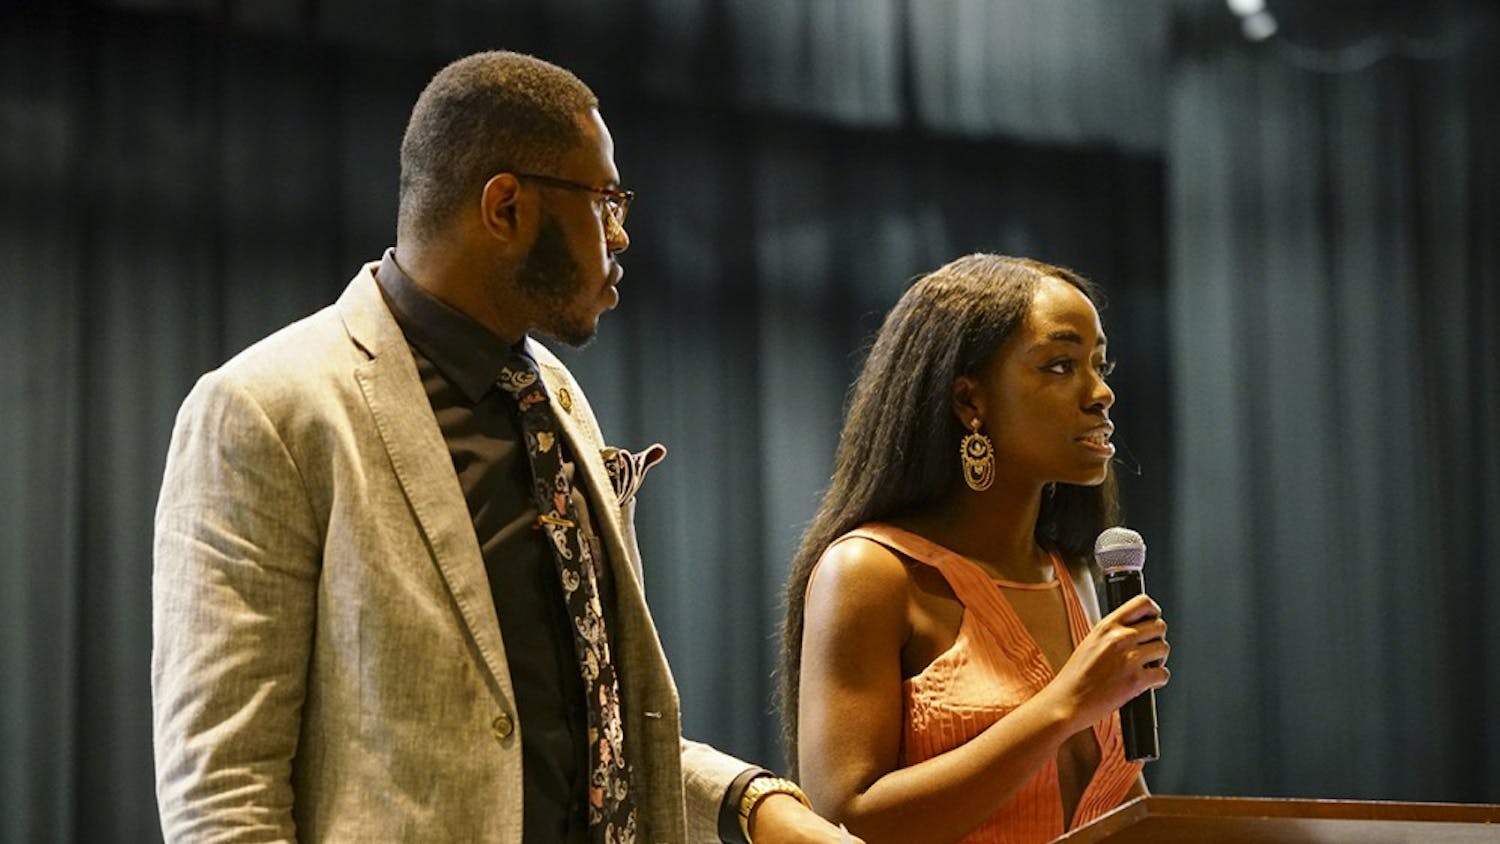 African Students’ Association President Dara Adeosun and Alpha Phi Alpha Vice President Morris Dolley open the Banquet Dinner Saturday evening in the Willkie Auditorium. The annual event was hosted by ASA in collaboration with Alpha Phi Alpha fraternity and Alpha Kappa Alpha sorority to raise money for Freetown, Sierra Leone, with World Hope International after the city suffered heavy flooding and mudslides in August.